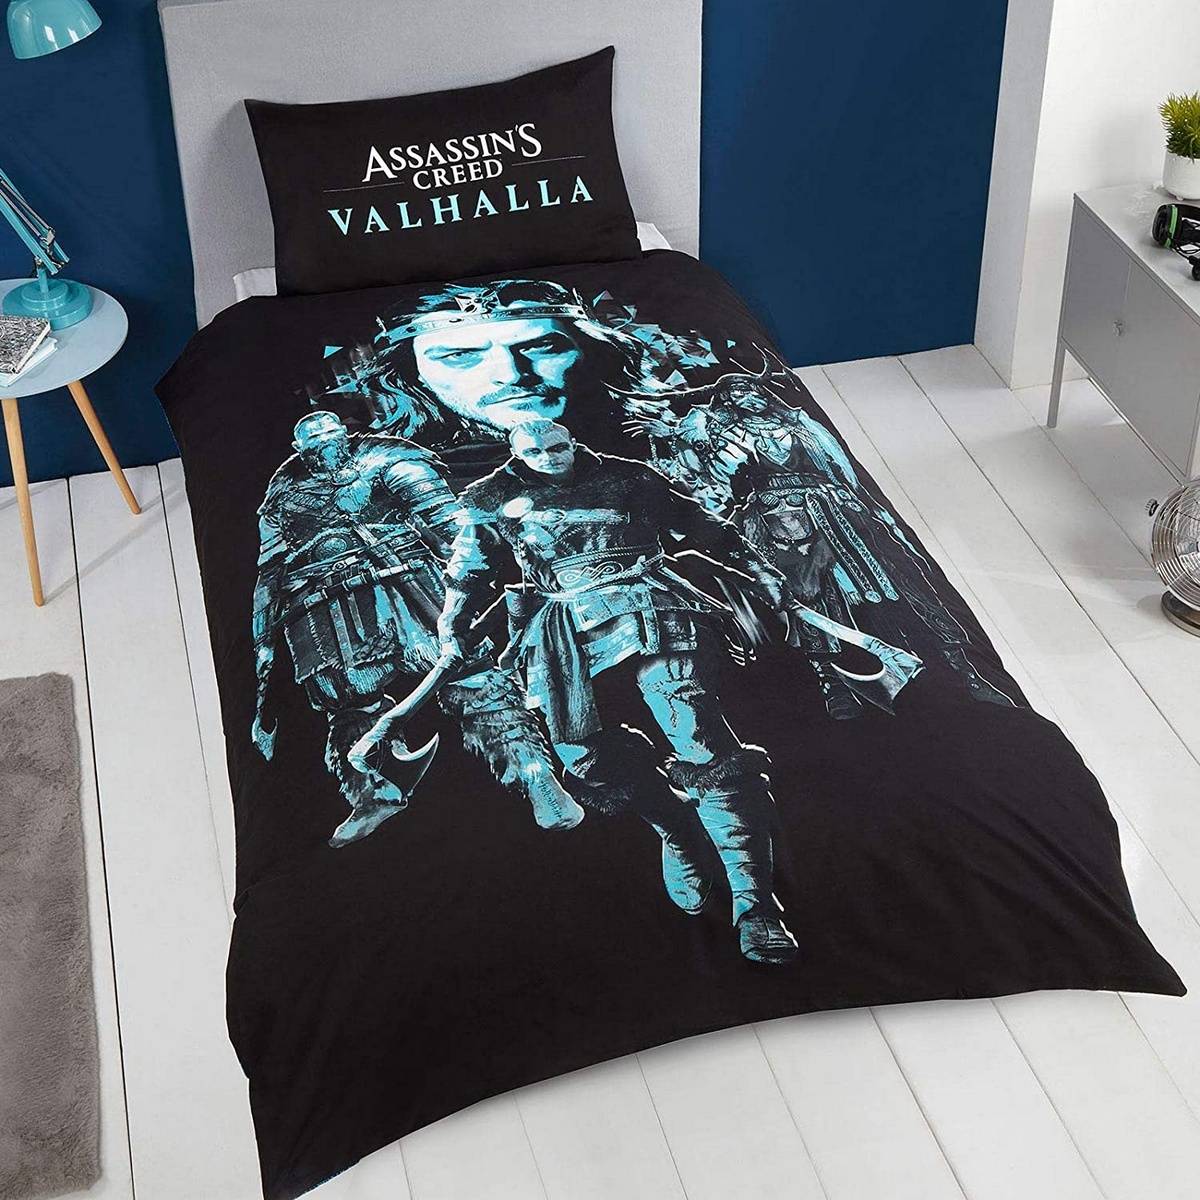 Single Duvet and Pillow Set: Assassin's Creed - Valhalla (52% Polyester, 48% Cotton)